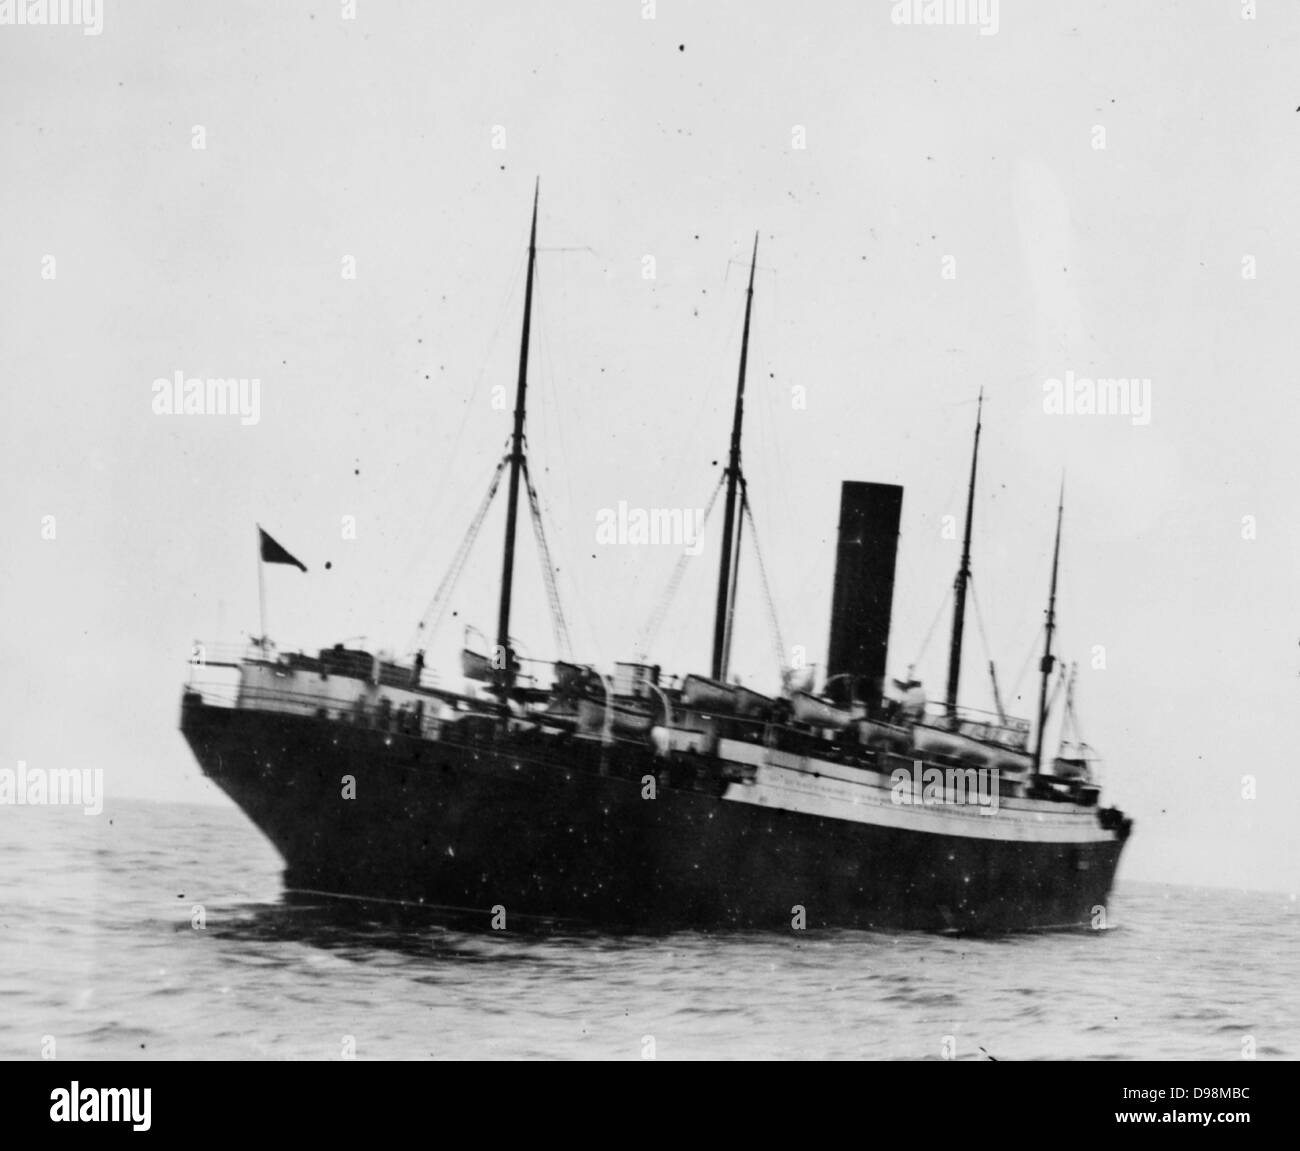 1912 New 5x7 Photo Side View of RMS TITANIC Ship Ill-Fated Ocean Liner